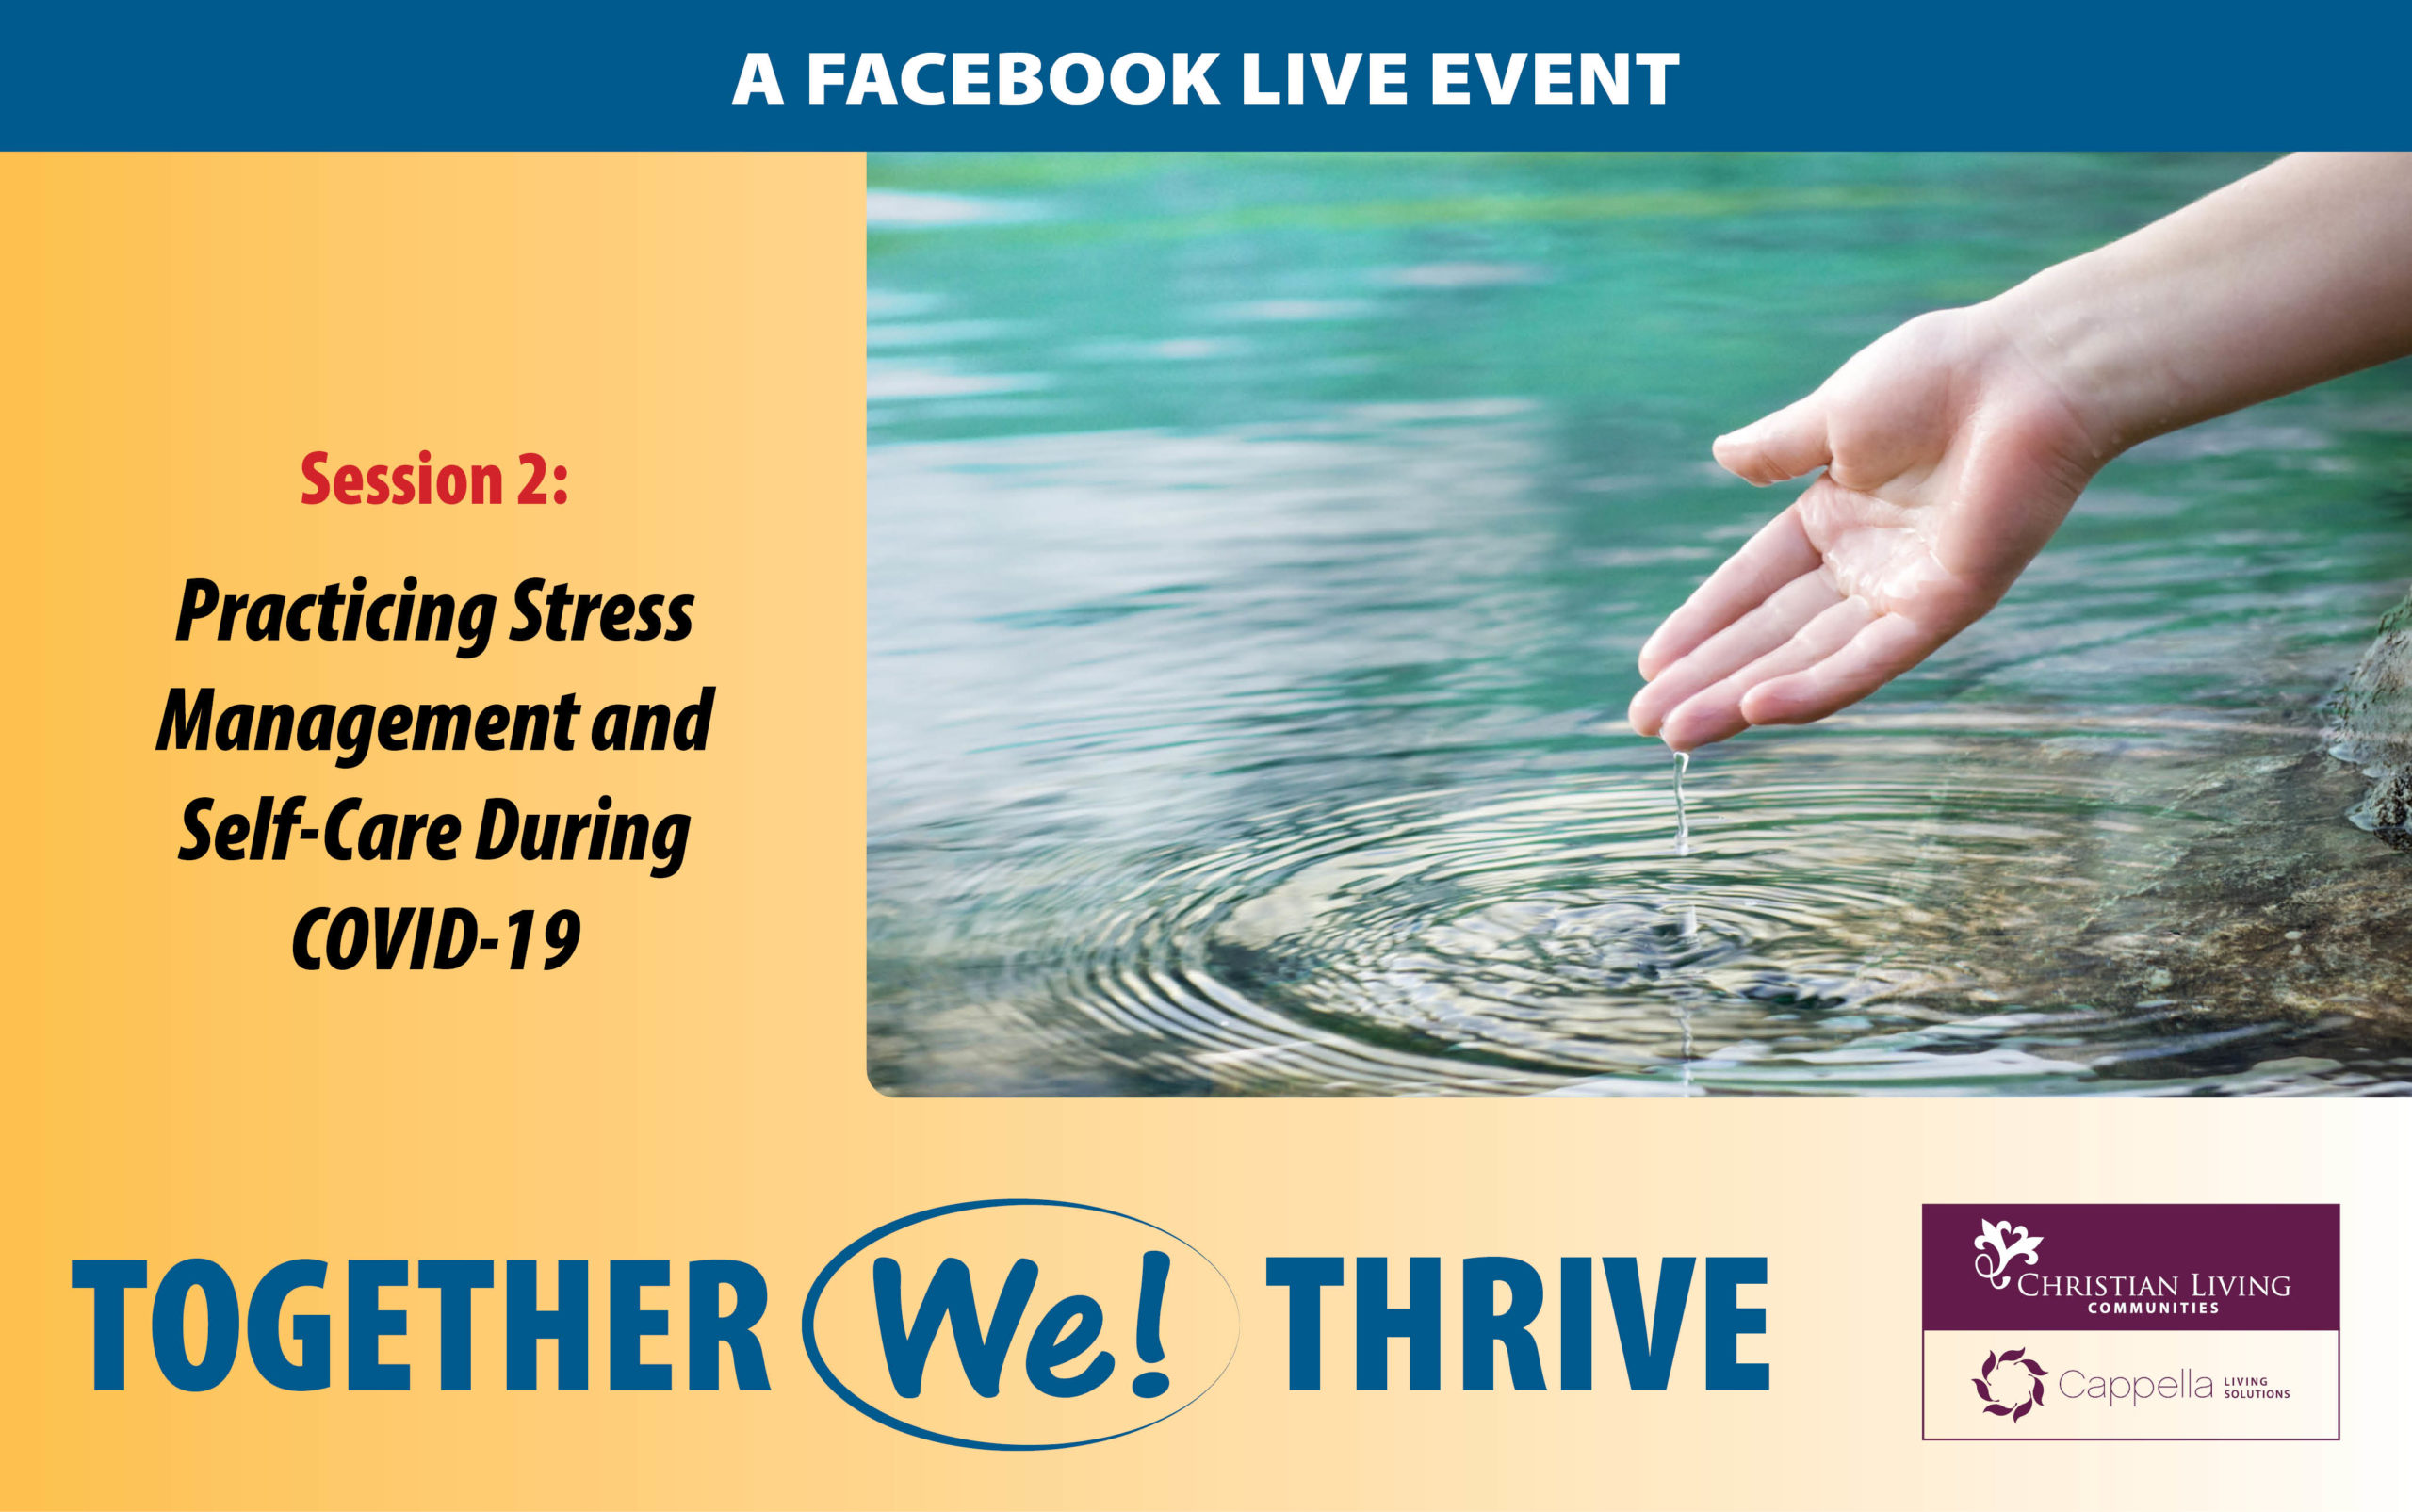 Together We! Thrive Facebook Live Event - Practicing Stress Management and Self-Care During COVID-19.